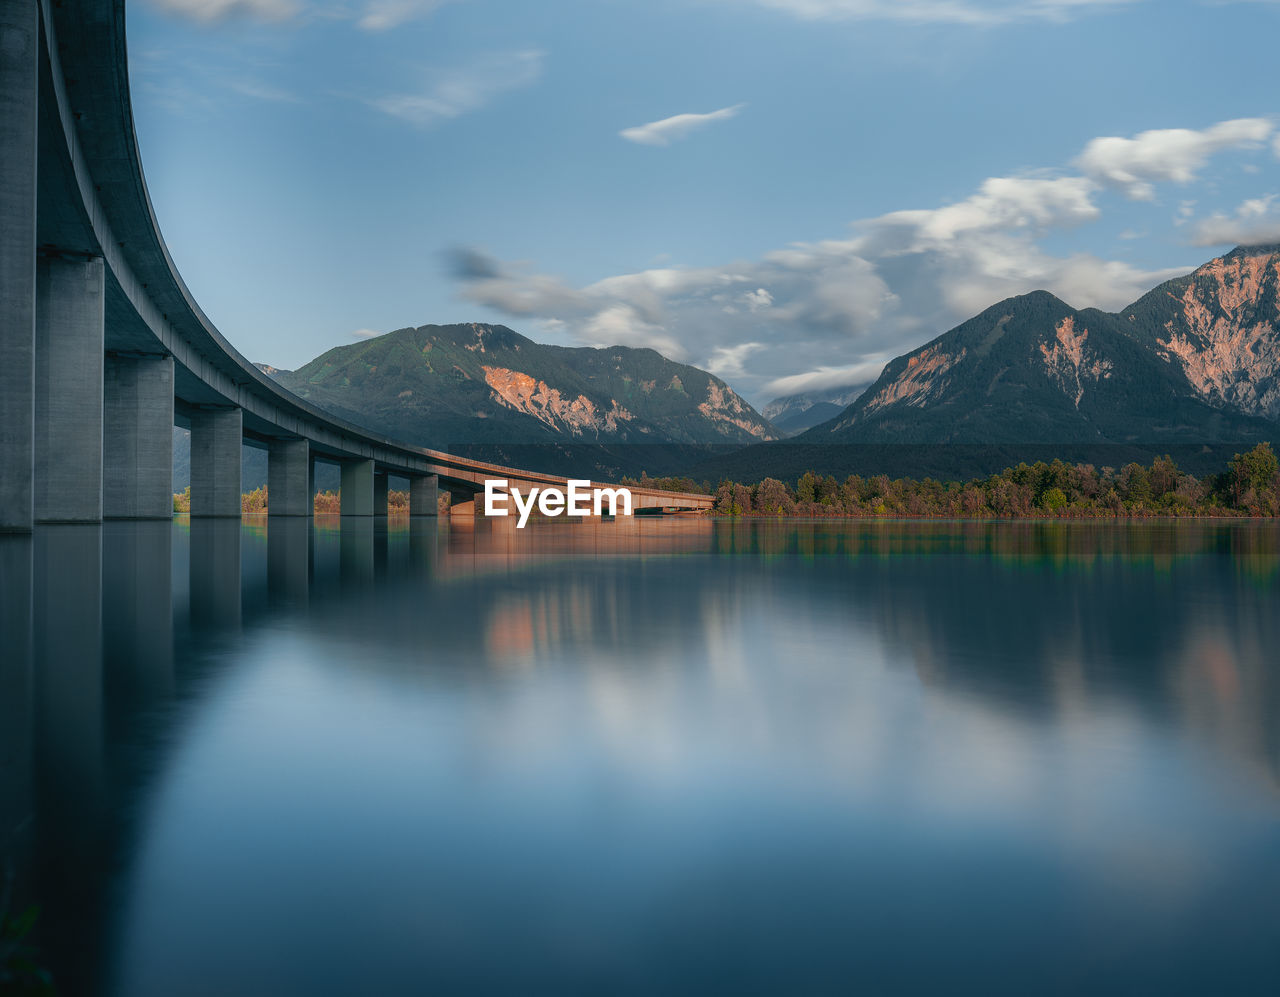 Scenic view of lake with bridge against sky